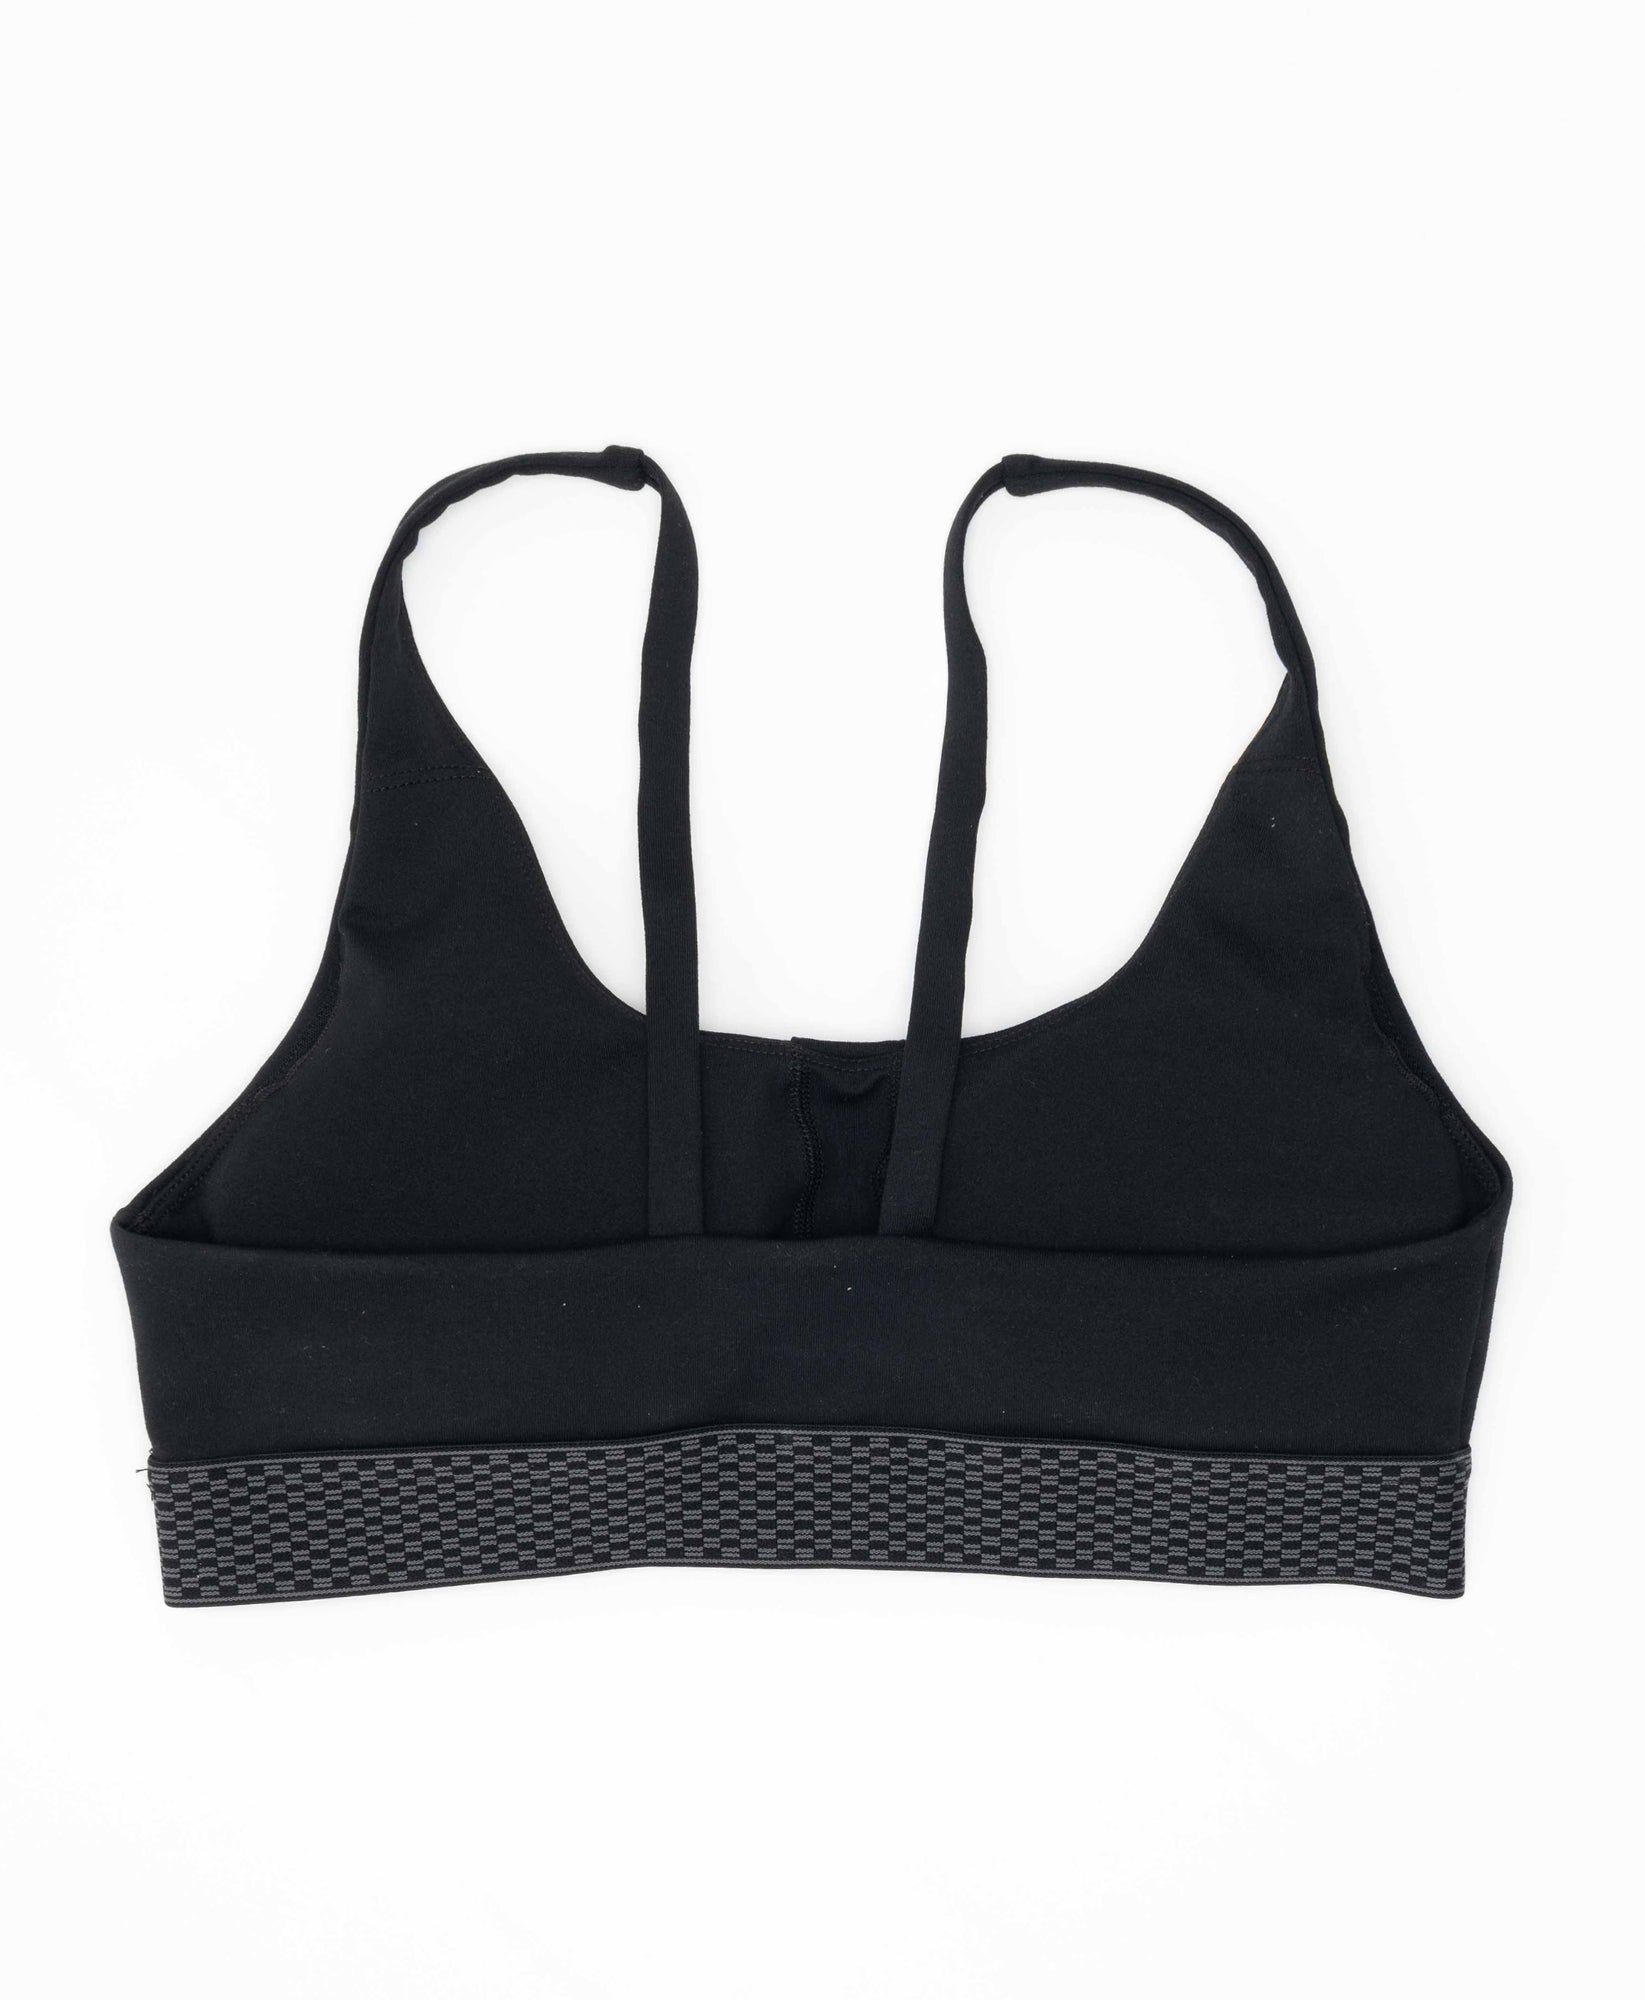 Women's Keyhole Bra in Asphalt Made With Recycled Nylon – Wear